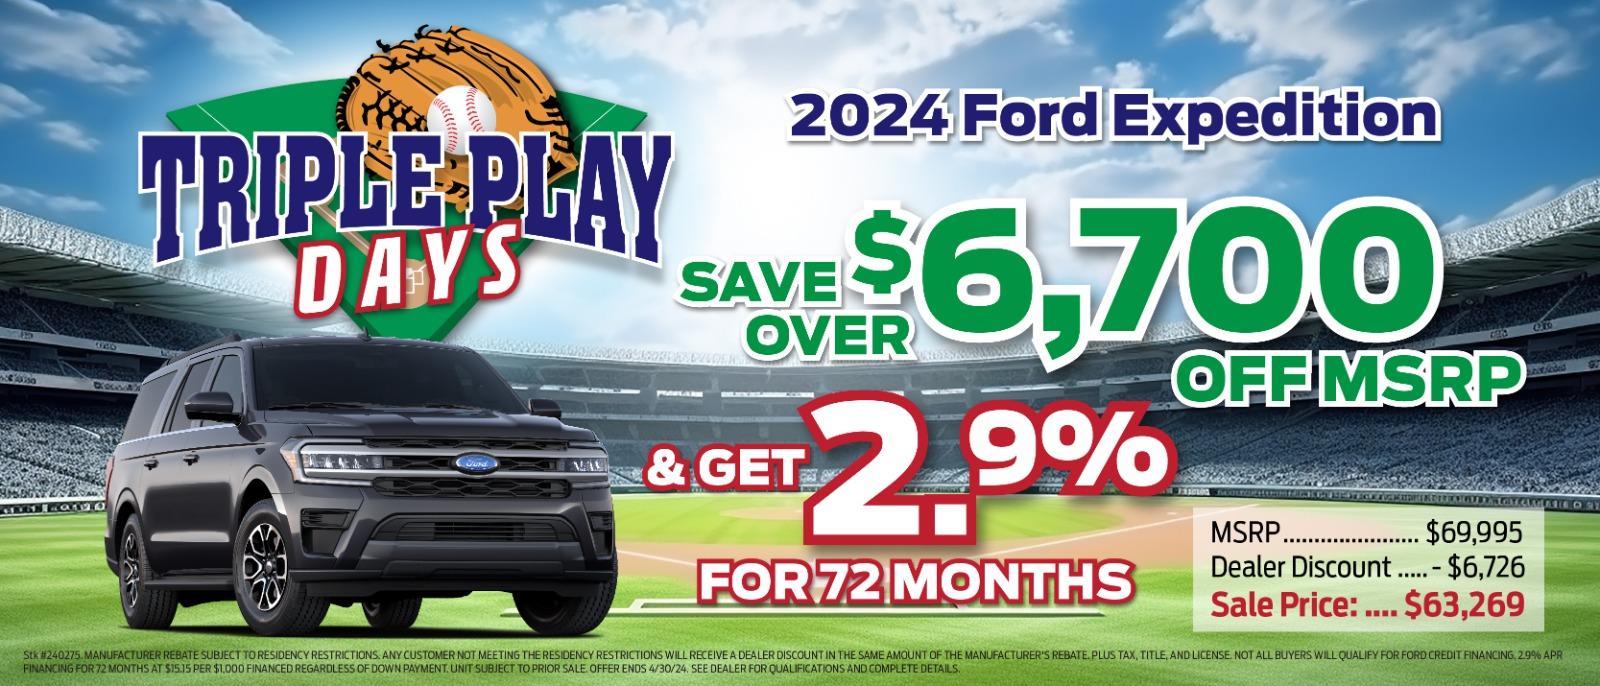 Ford Expedition Offer!⚾